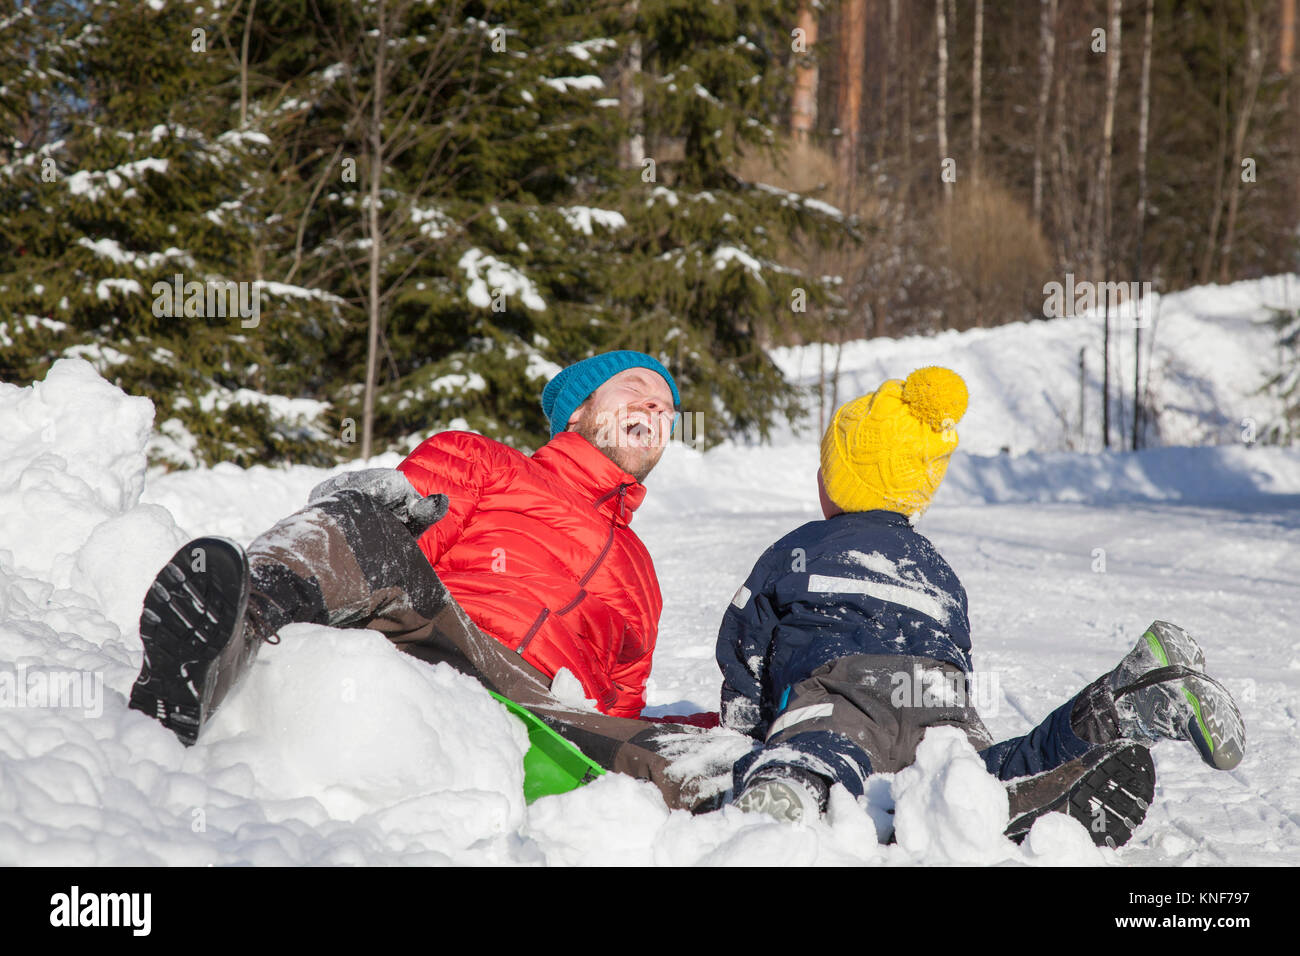 Man and son laughing after falling from toboggan in snow covered landscape Stock Photo